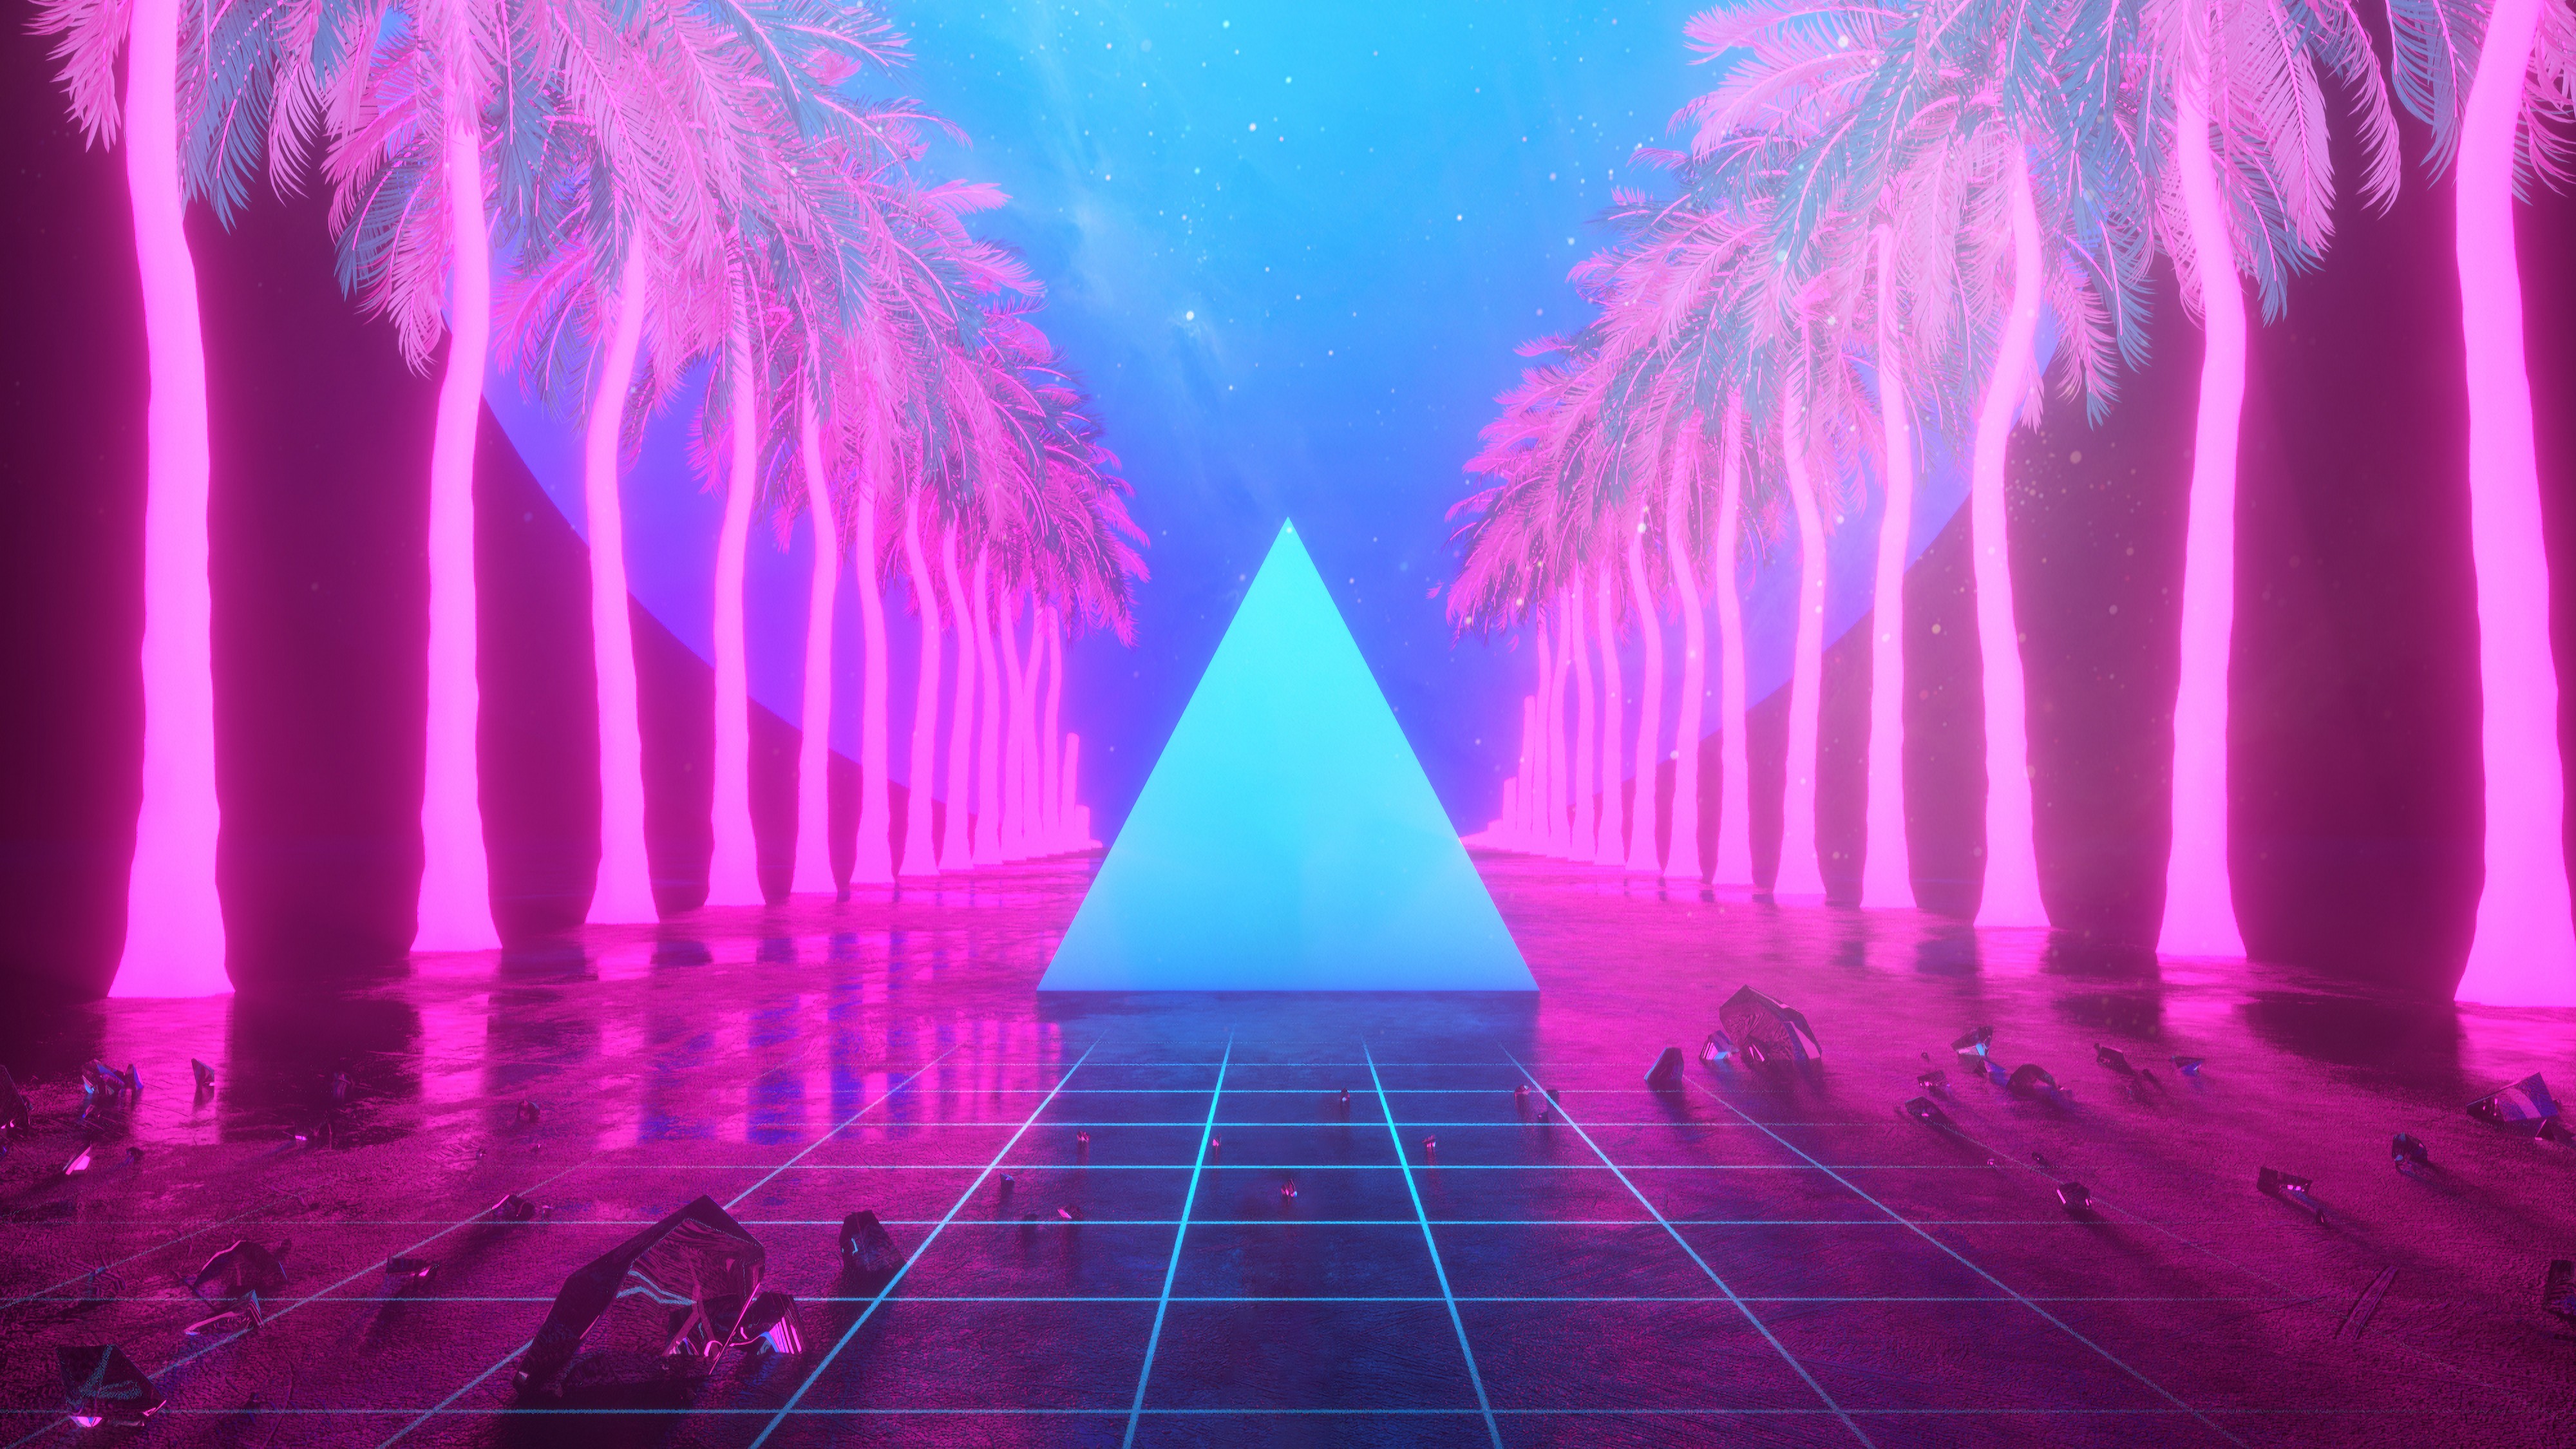 abstract, Pyramid, Retro style, Reflection, Palm trees, Stars, Vaporwave, Post post modernism Wallpaper